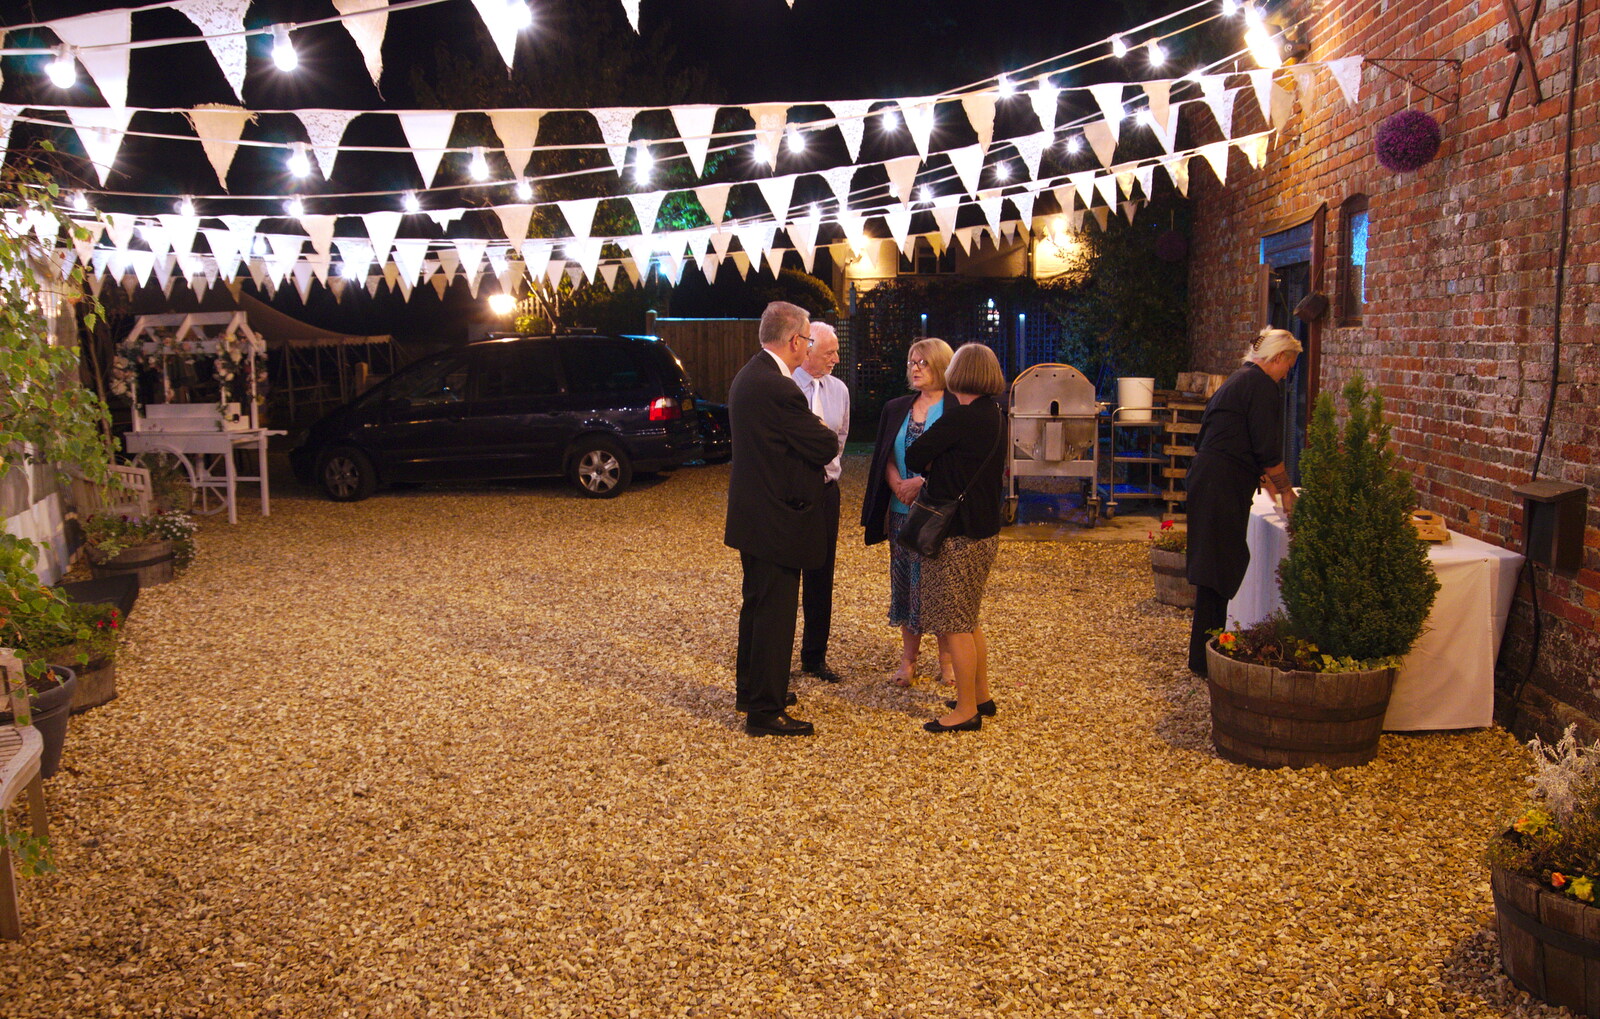 Chatting outside under the lights from Neil and Martina's Wedding, The Three Tuns, Bransgore, Dorset - 20th September 2019